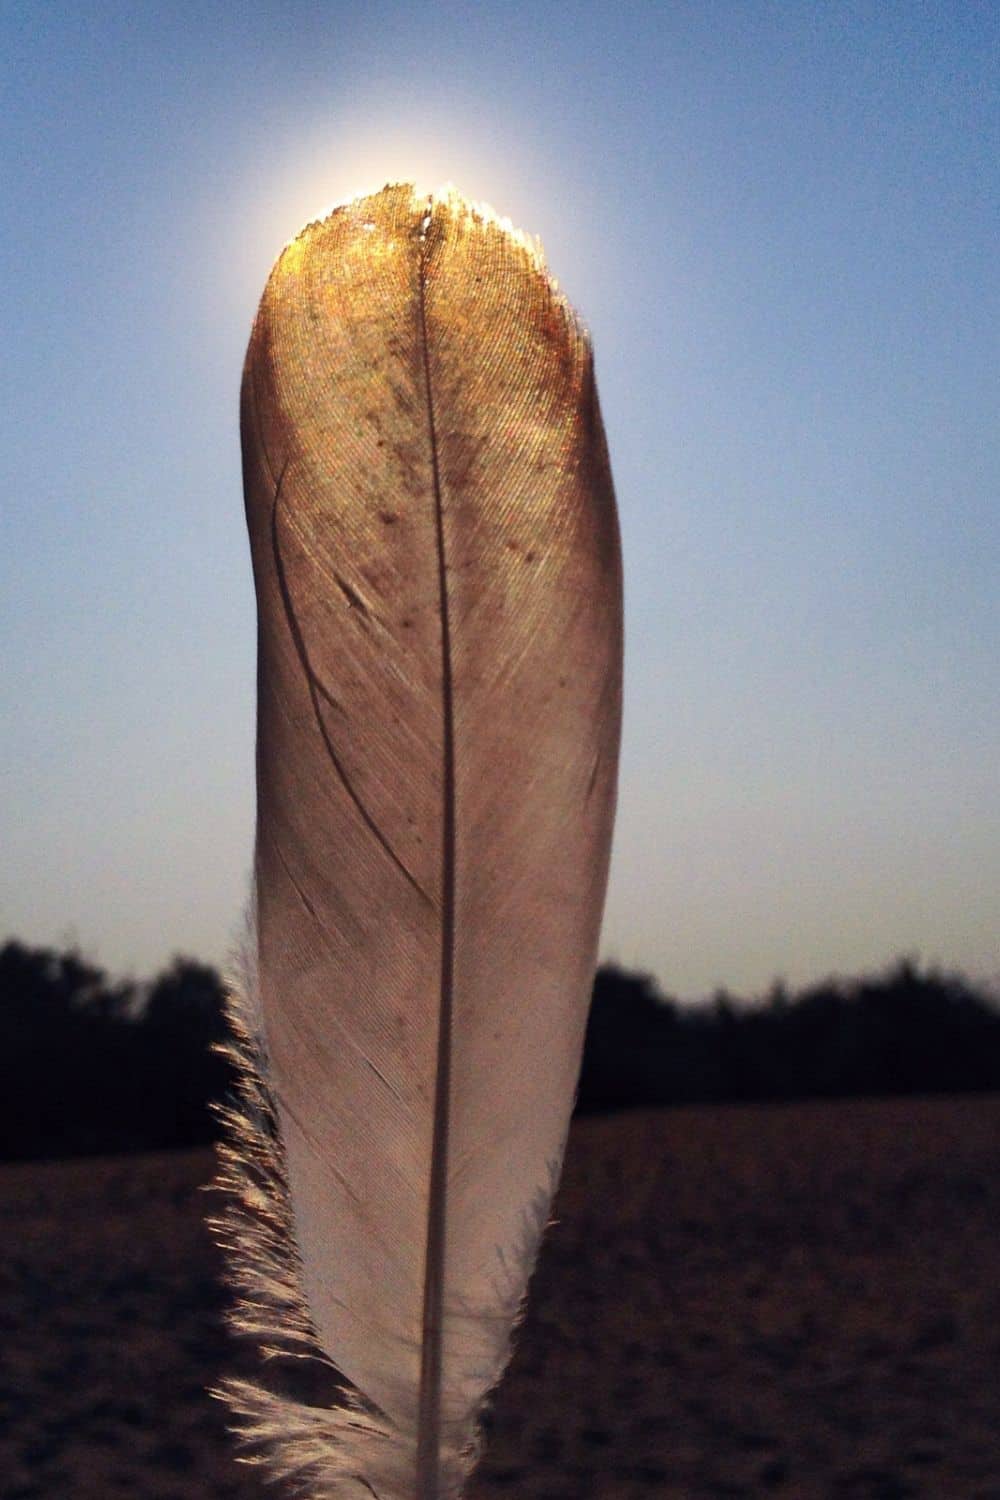 what does it mean when you find a white feather?